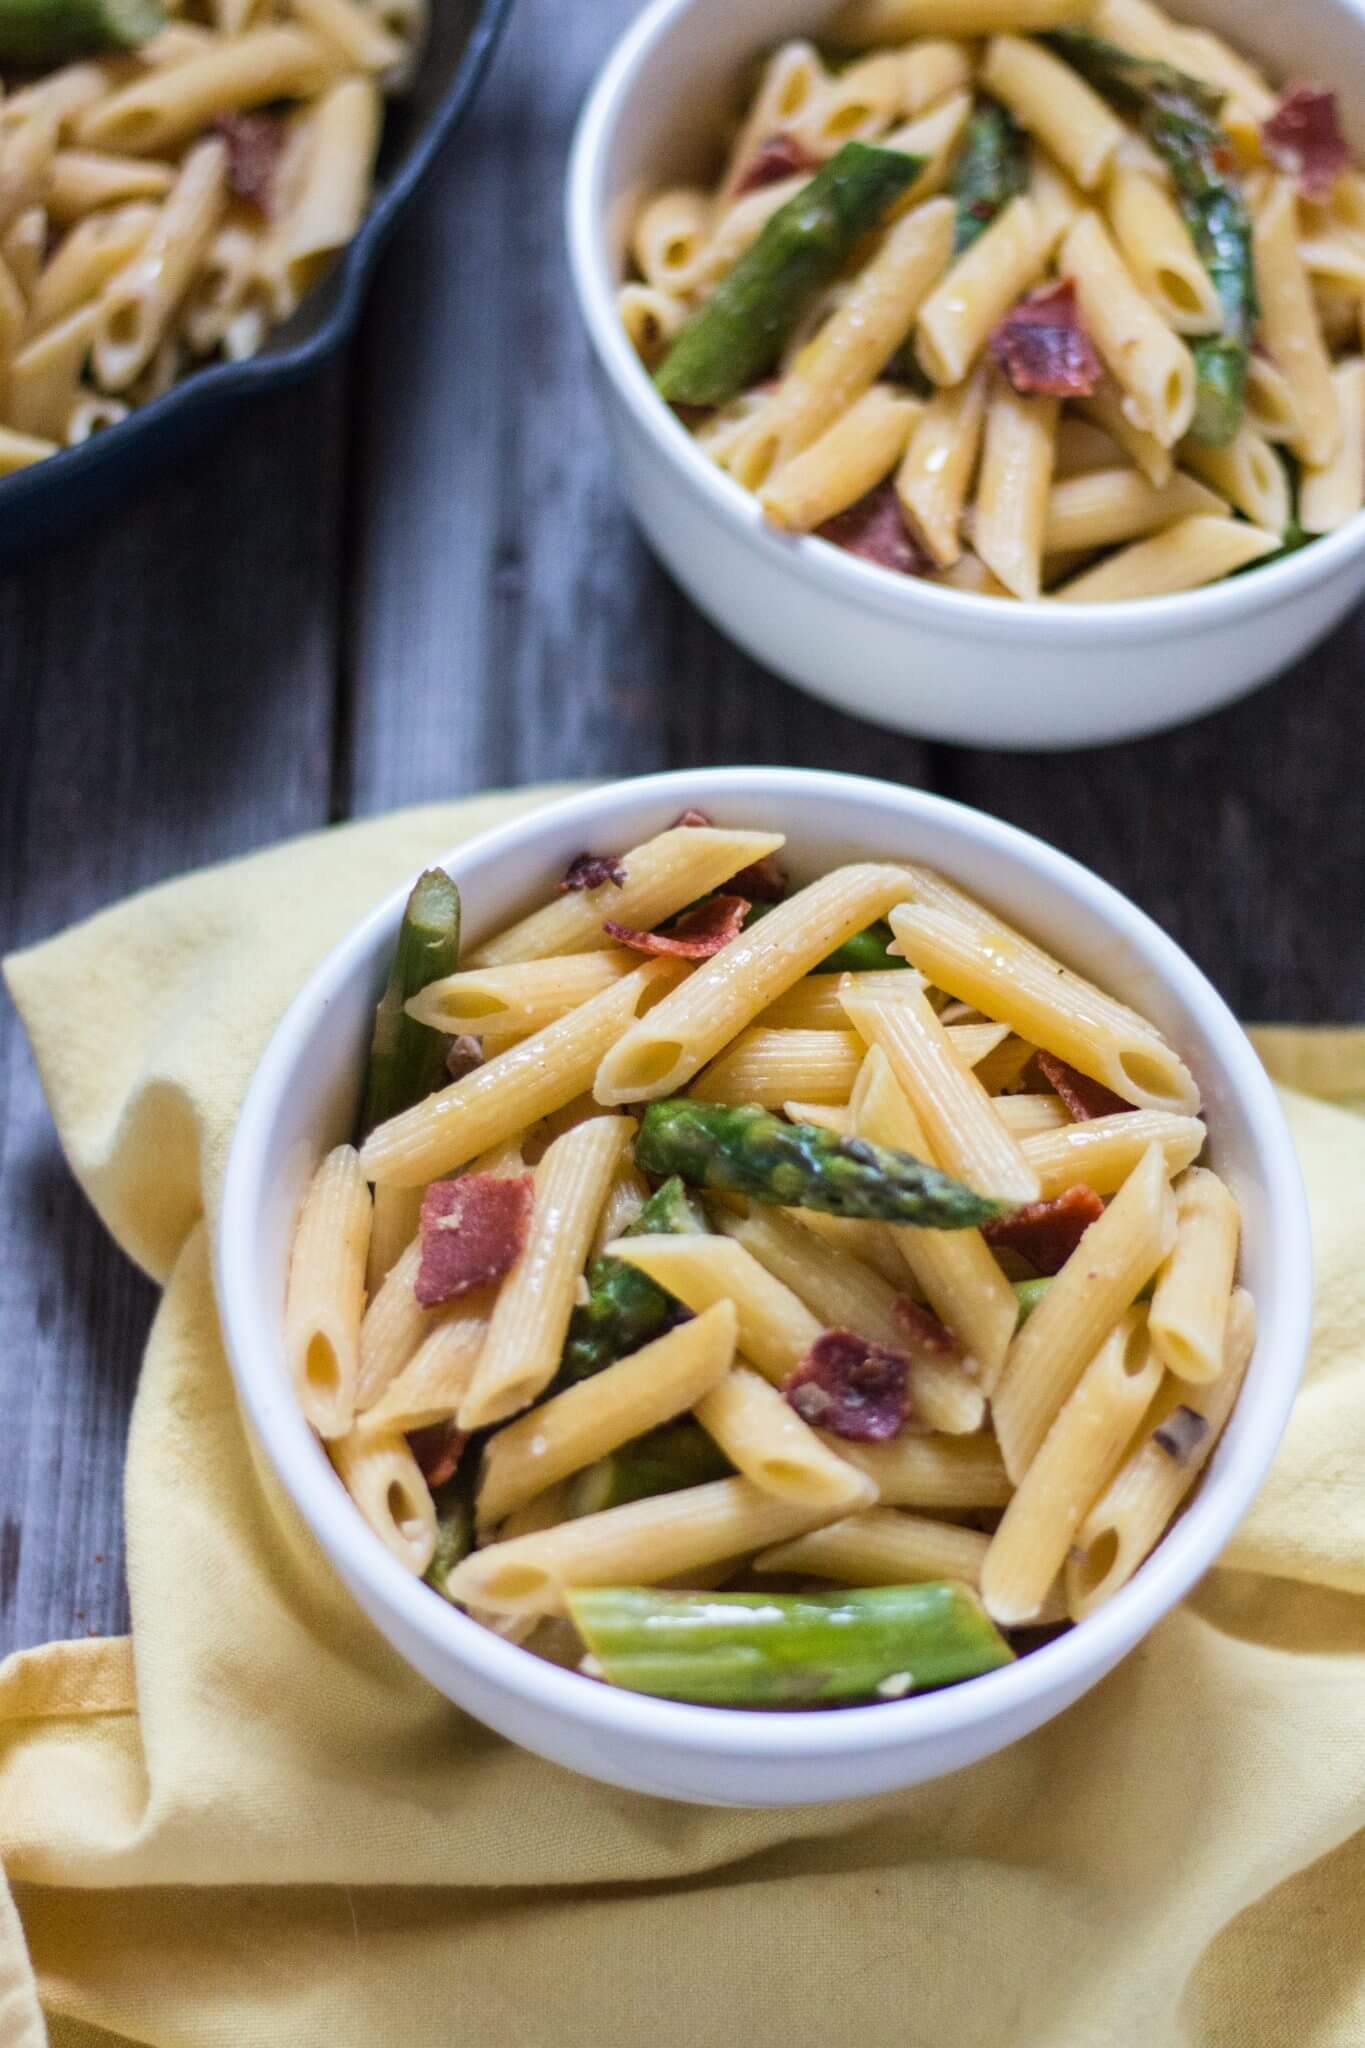 Pasta with Asparagus, Mushrooms and “Bacon”